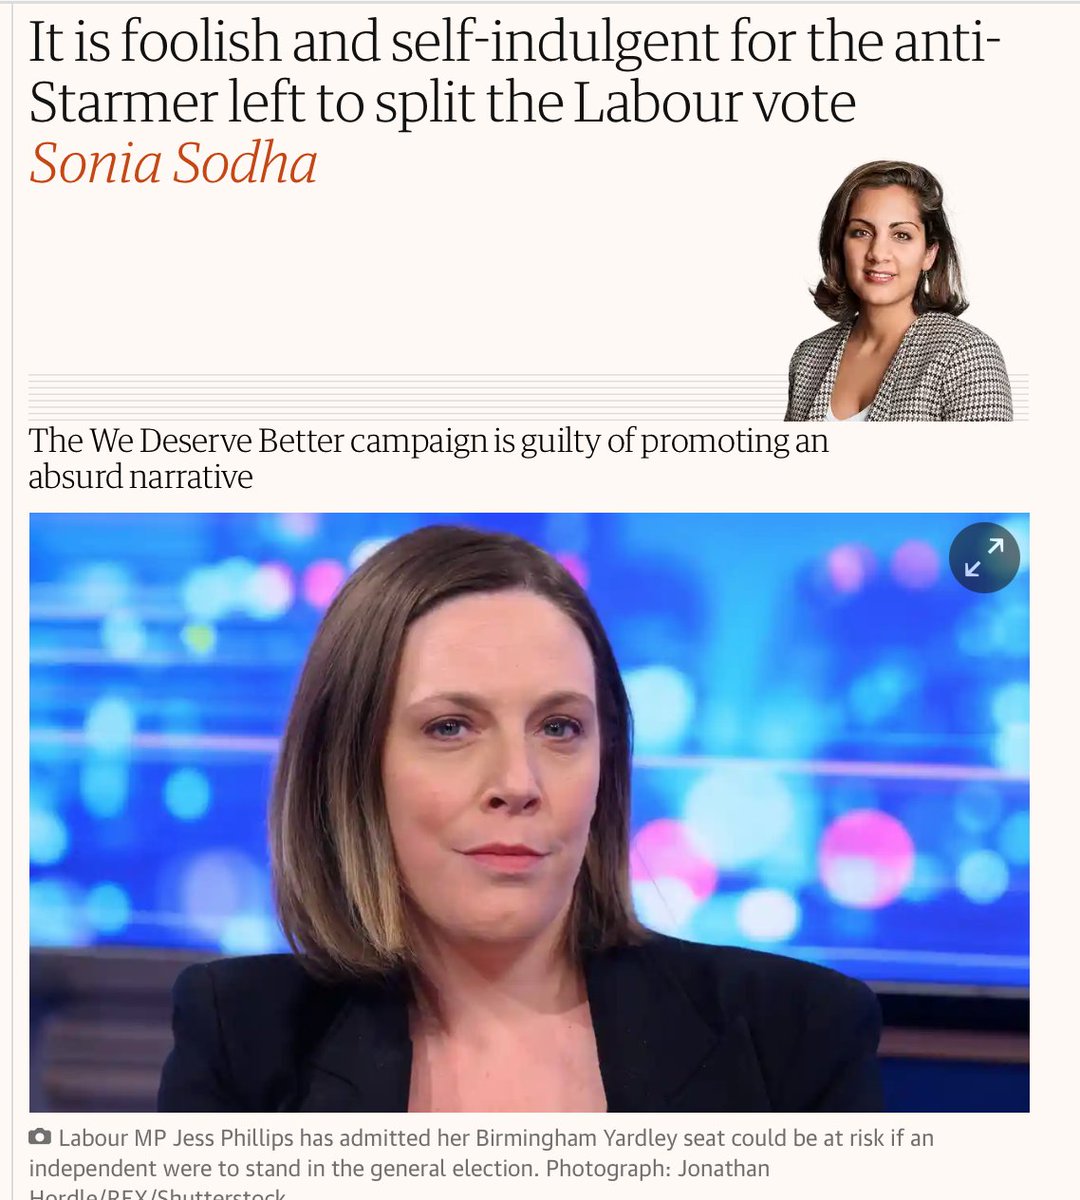 Image 1: 'The door is open and you can leave.' The left leaves. Image 2: 'The left are splitting the Labour vote.' Couldn't make this nonsense up. :0) #ItWasAScam